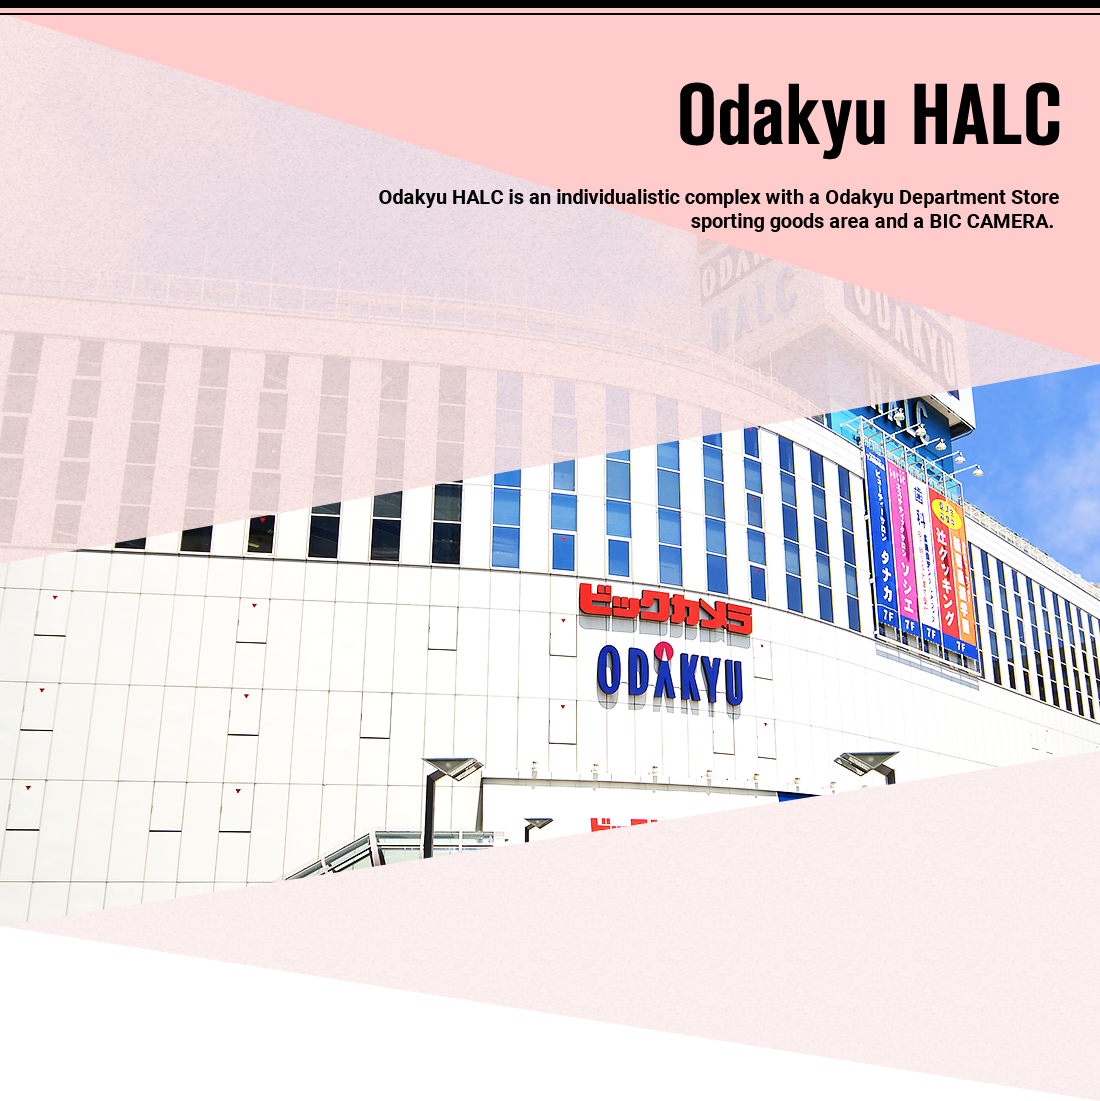 Odakyu HALC is an individualistic complex with a Odakyu Department Store sporting goods area and a BIC CAMERA.